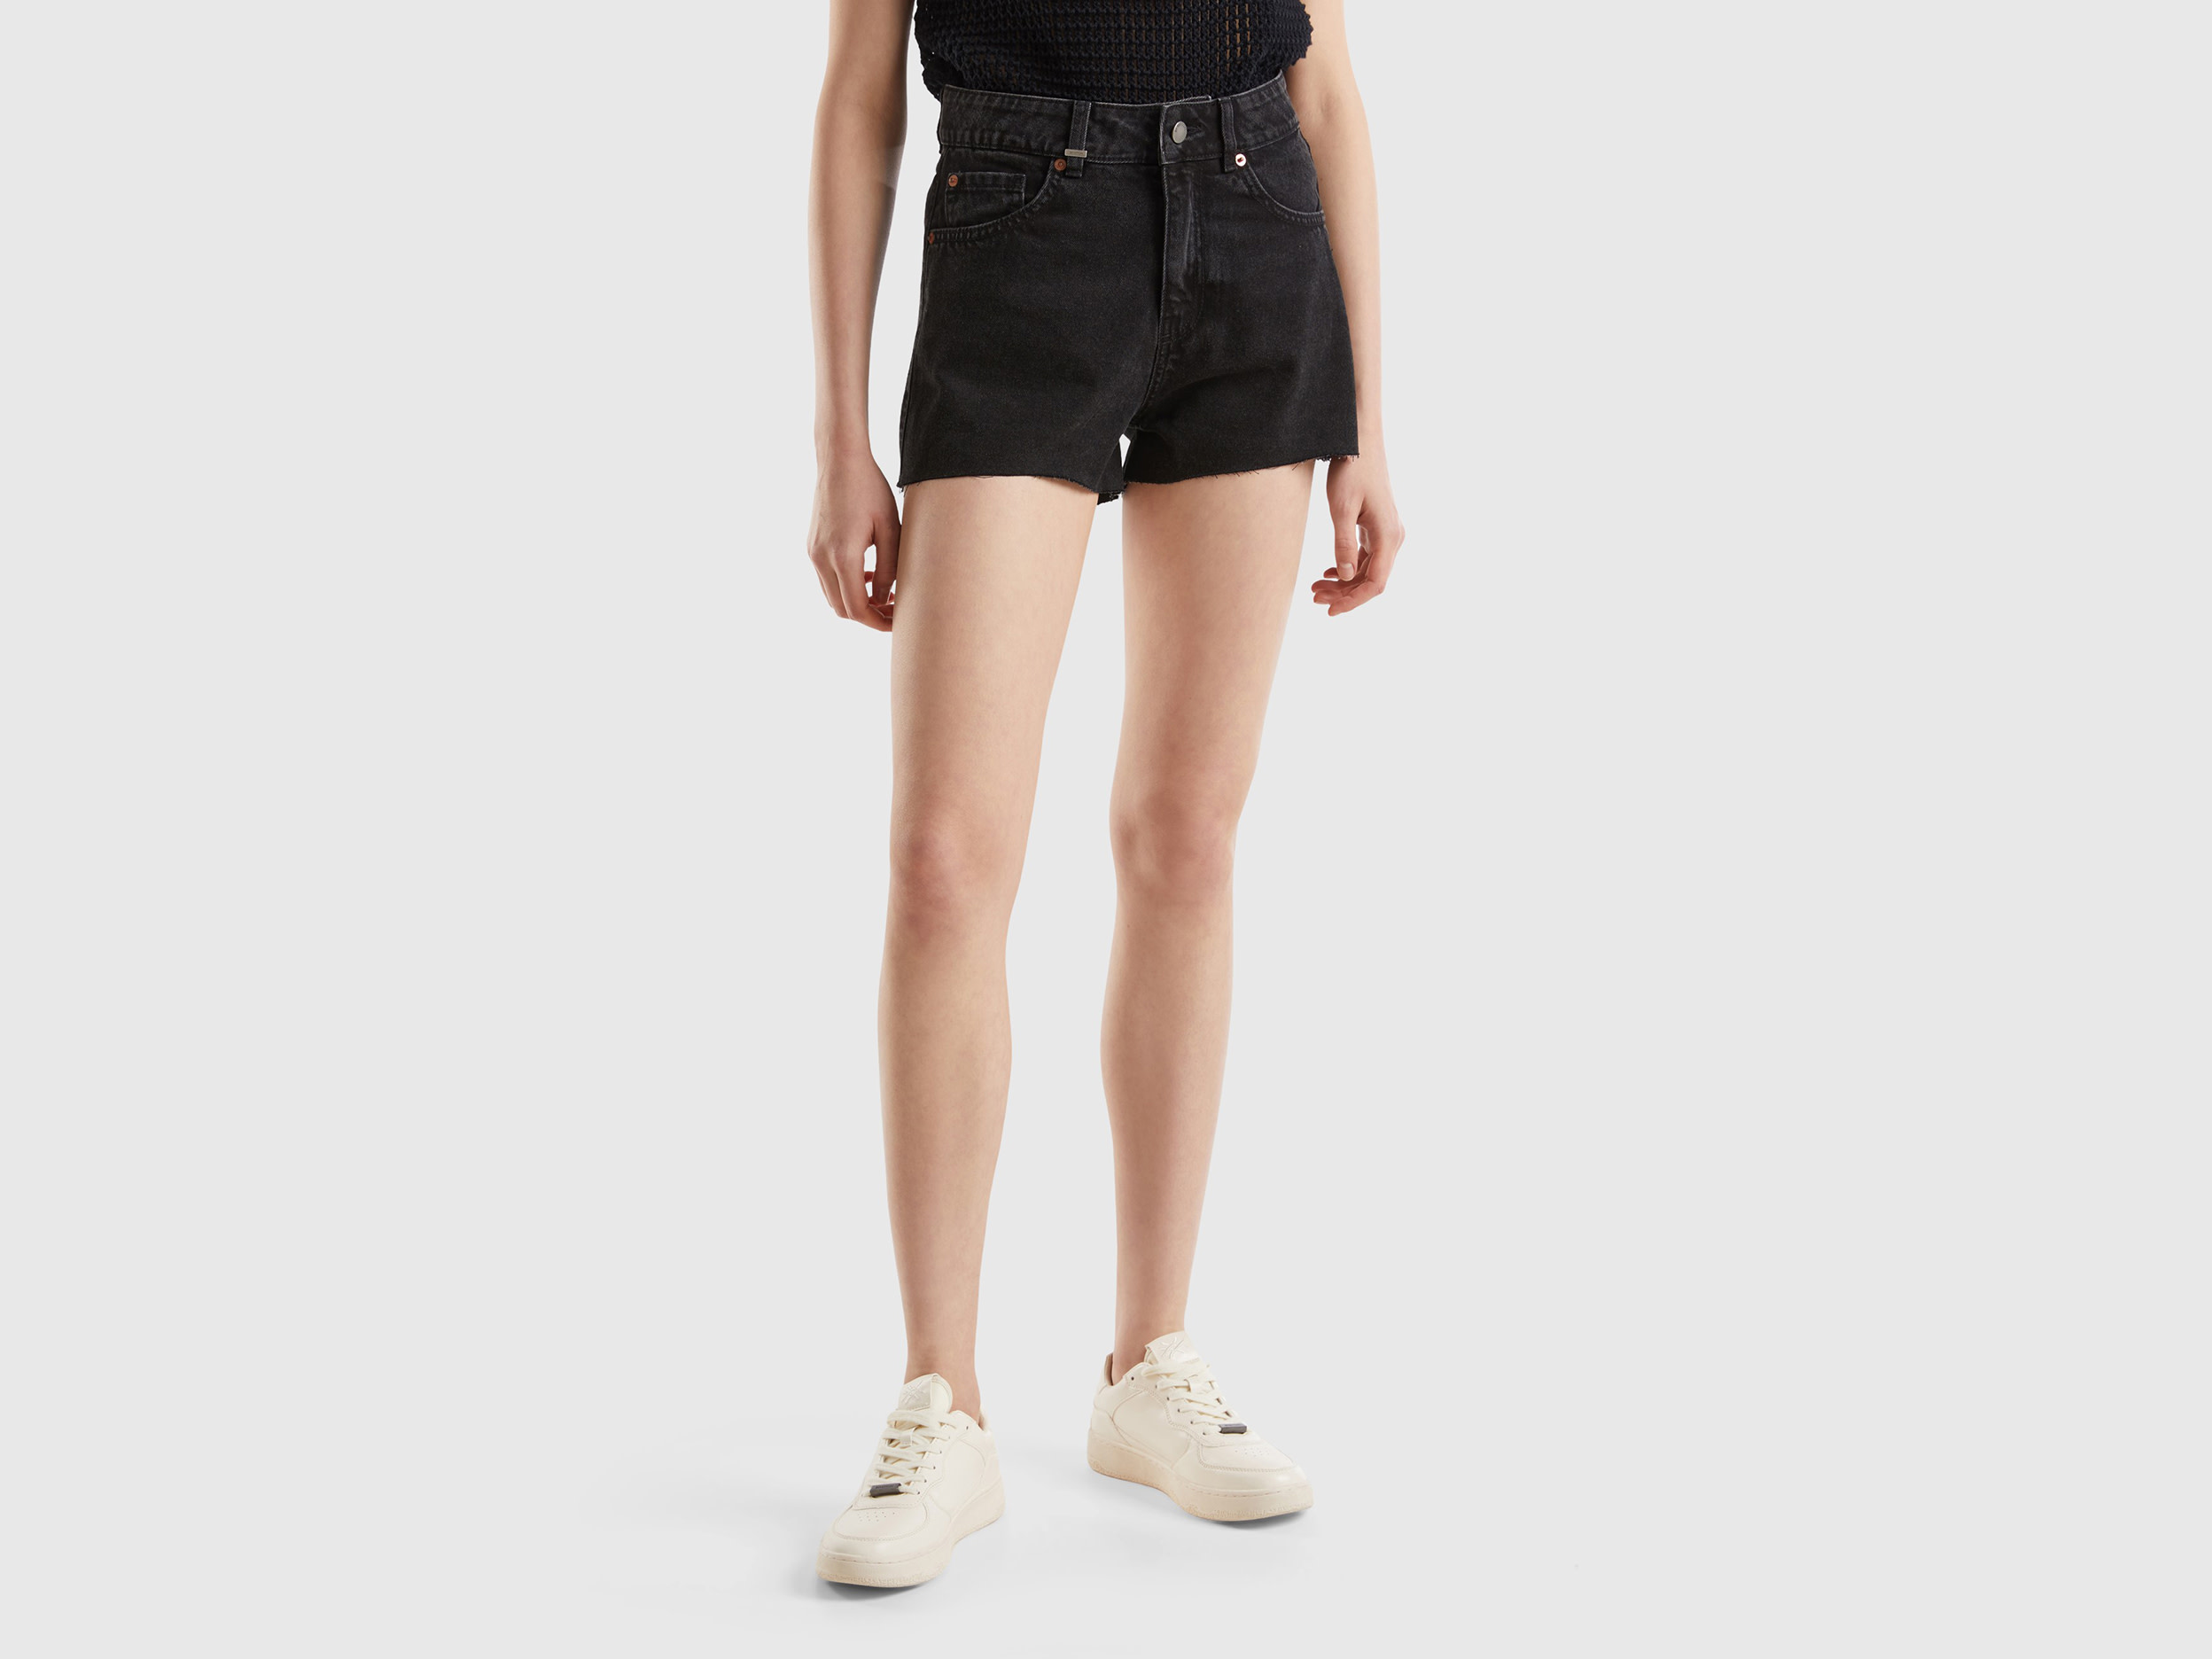 Image of Benetton, Frayed Shorts In Recycled Cotton Blend, size 29, Black, Women